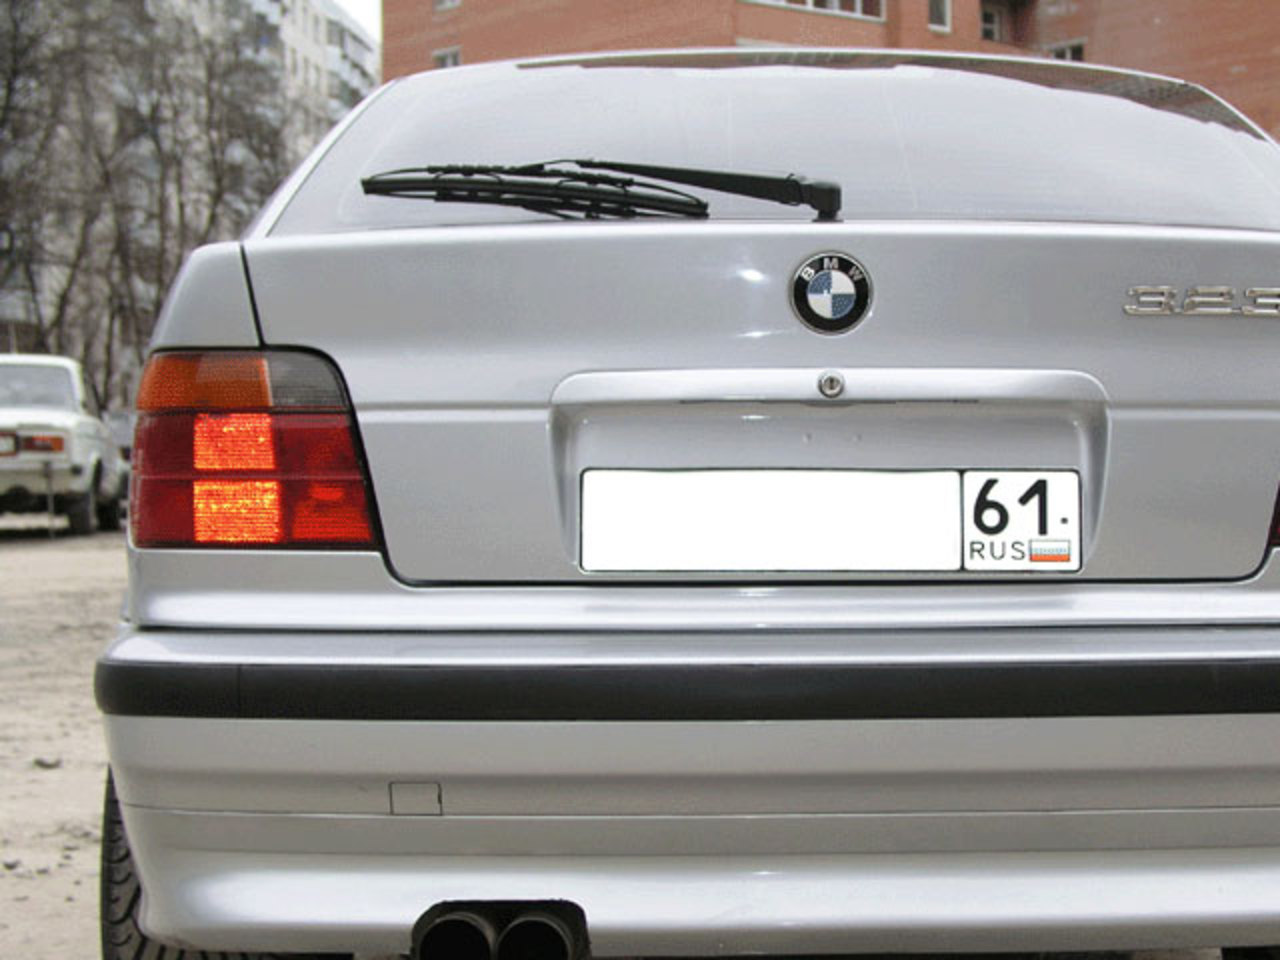 DesignerCars - BMW 323ti - My Friend's Compact Pictures